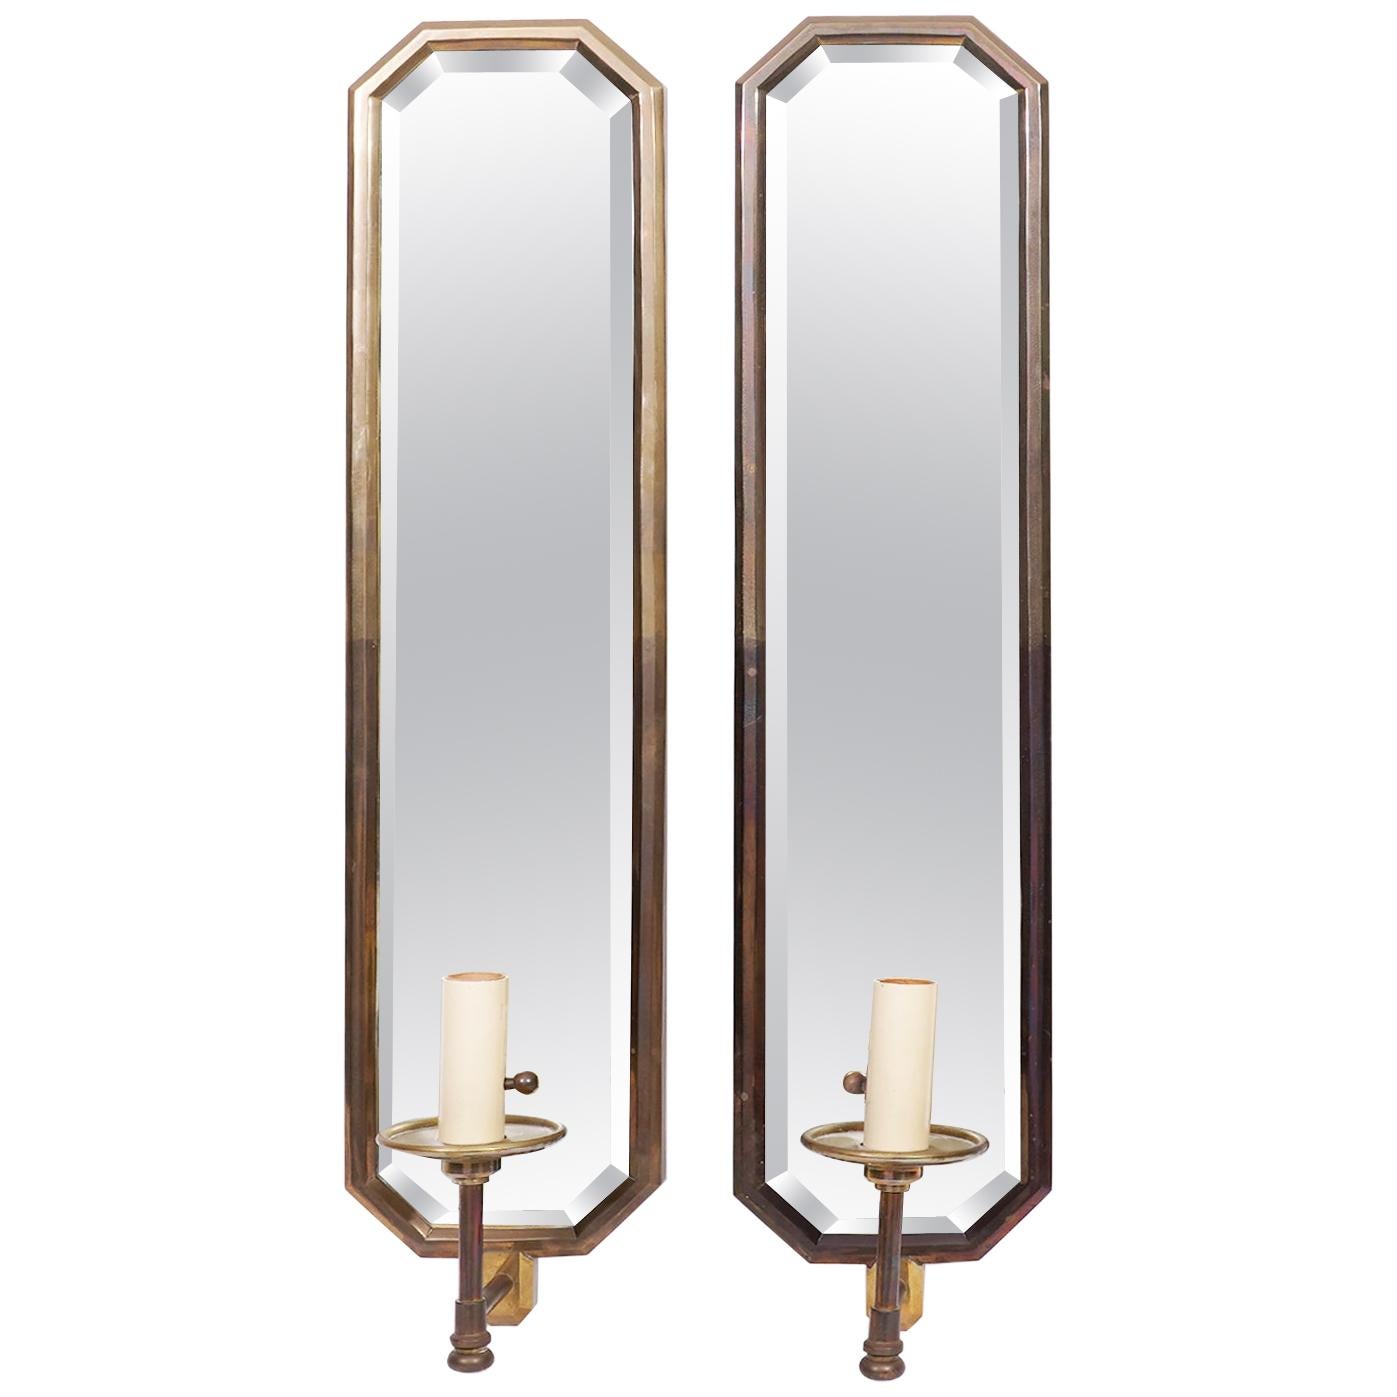 Pair of Art Deco Style Chapman Mirror Panel Brass Electric Wall Sconces, 1970s